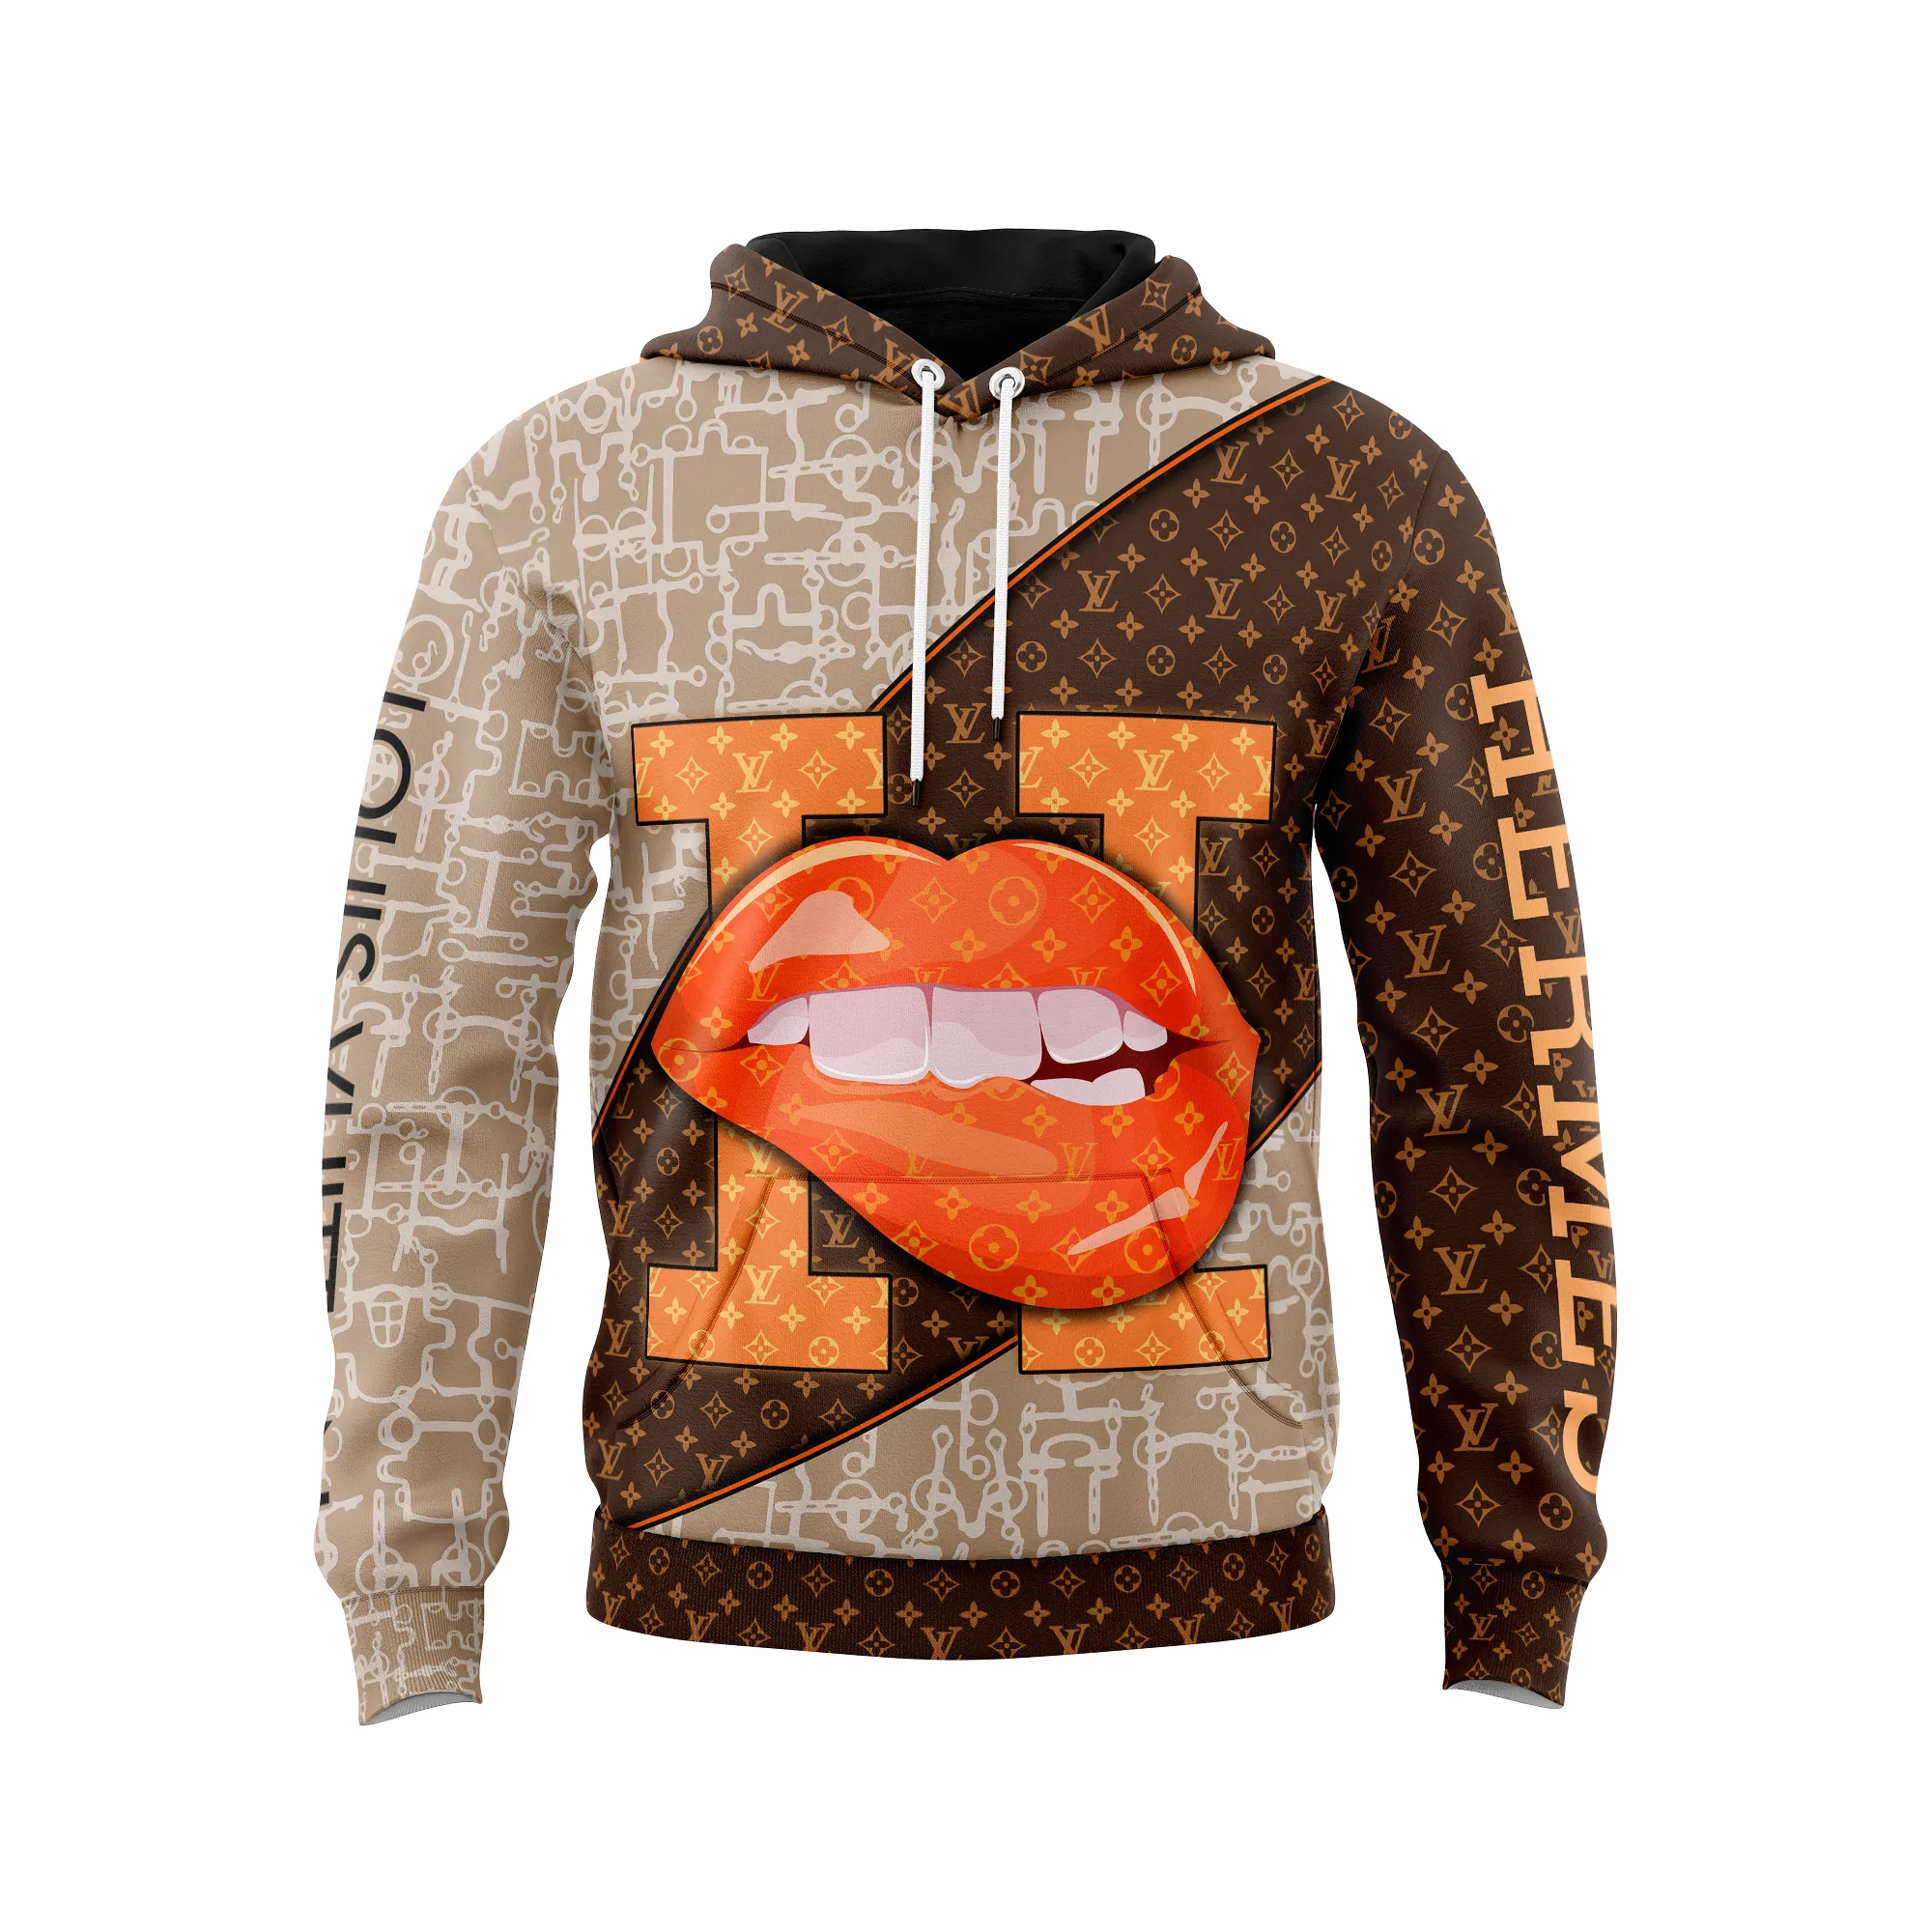 Louis Vuitton Hermes Lips Brown Type 526 Luxury Hoodie Fashion Brand Outfit